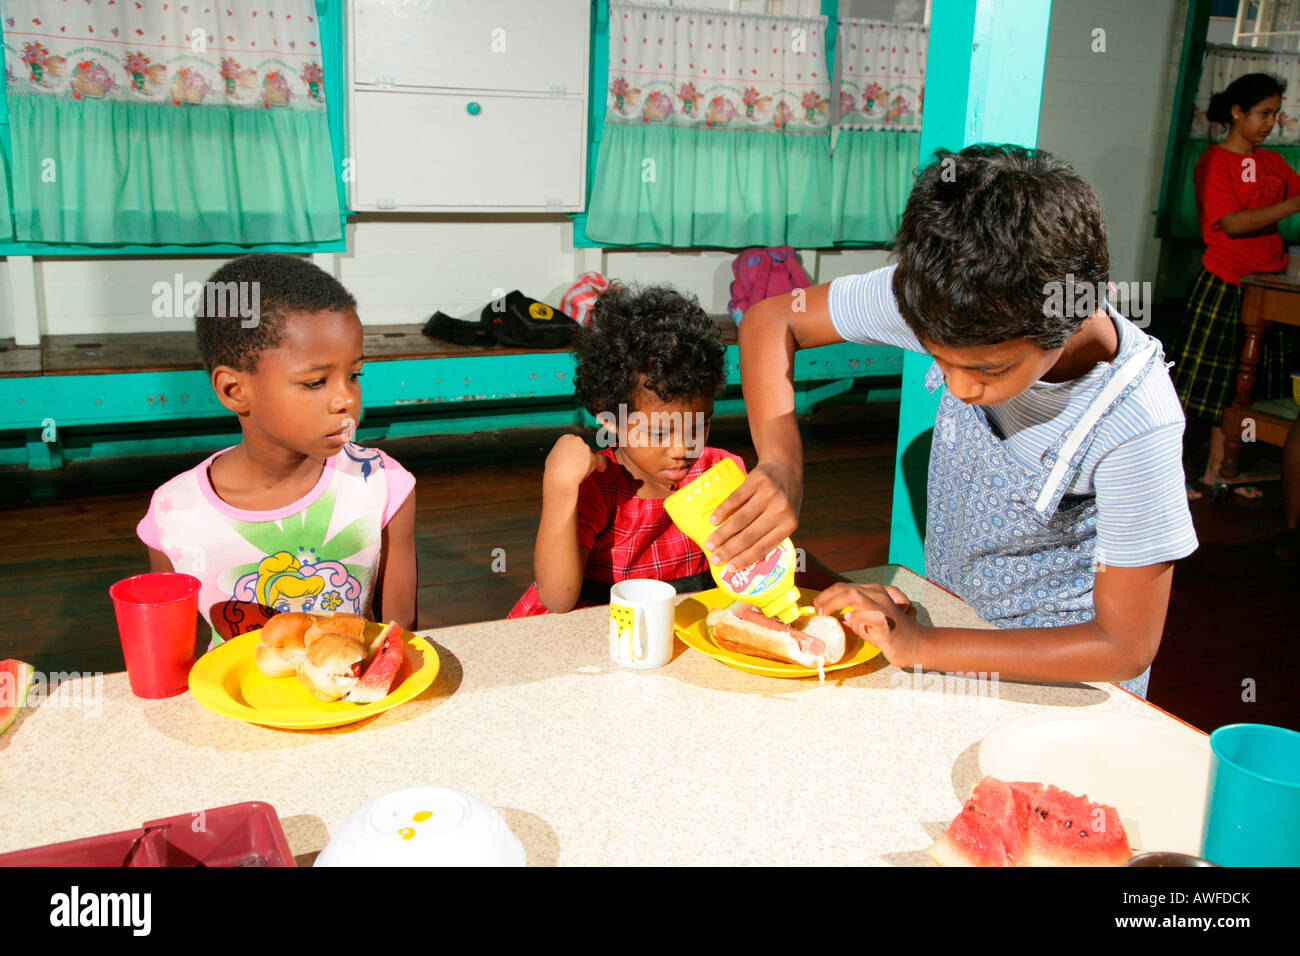 Girls with full plates, everyday life at an Ursuline convent and orphanage, Georgetown, Guyana, South America Stock Photo